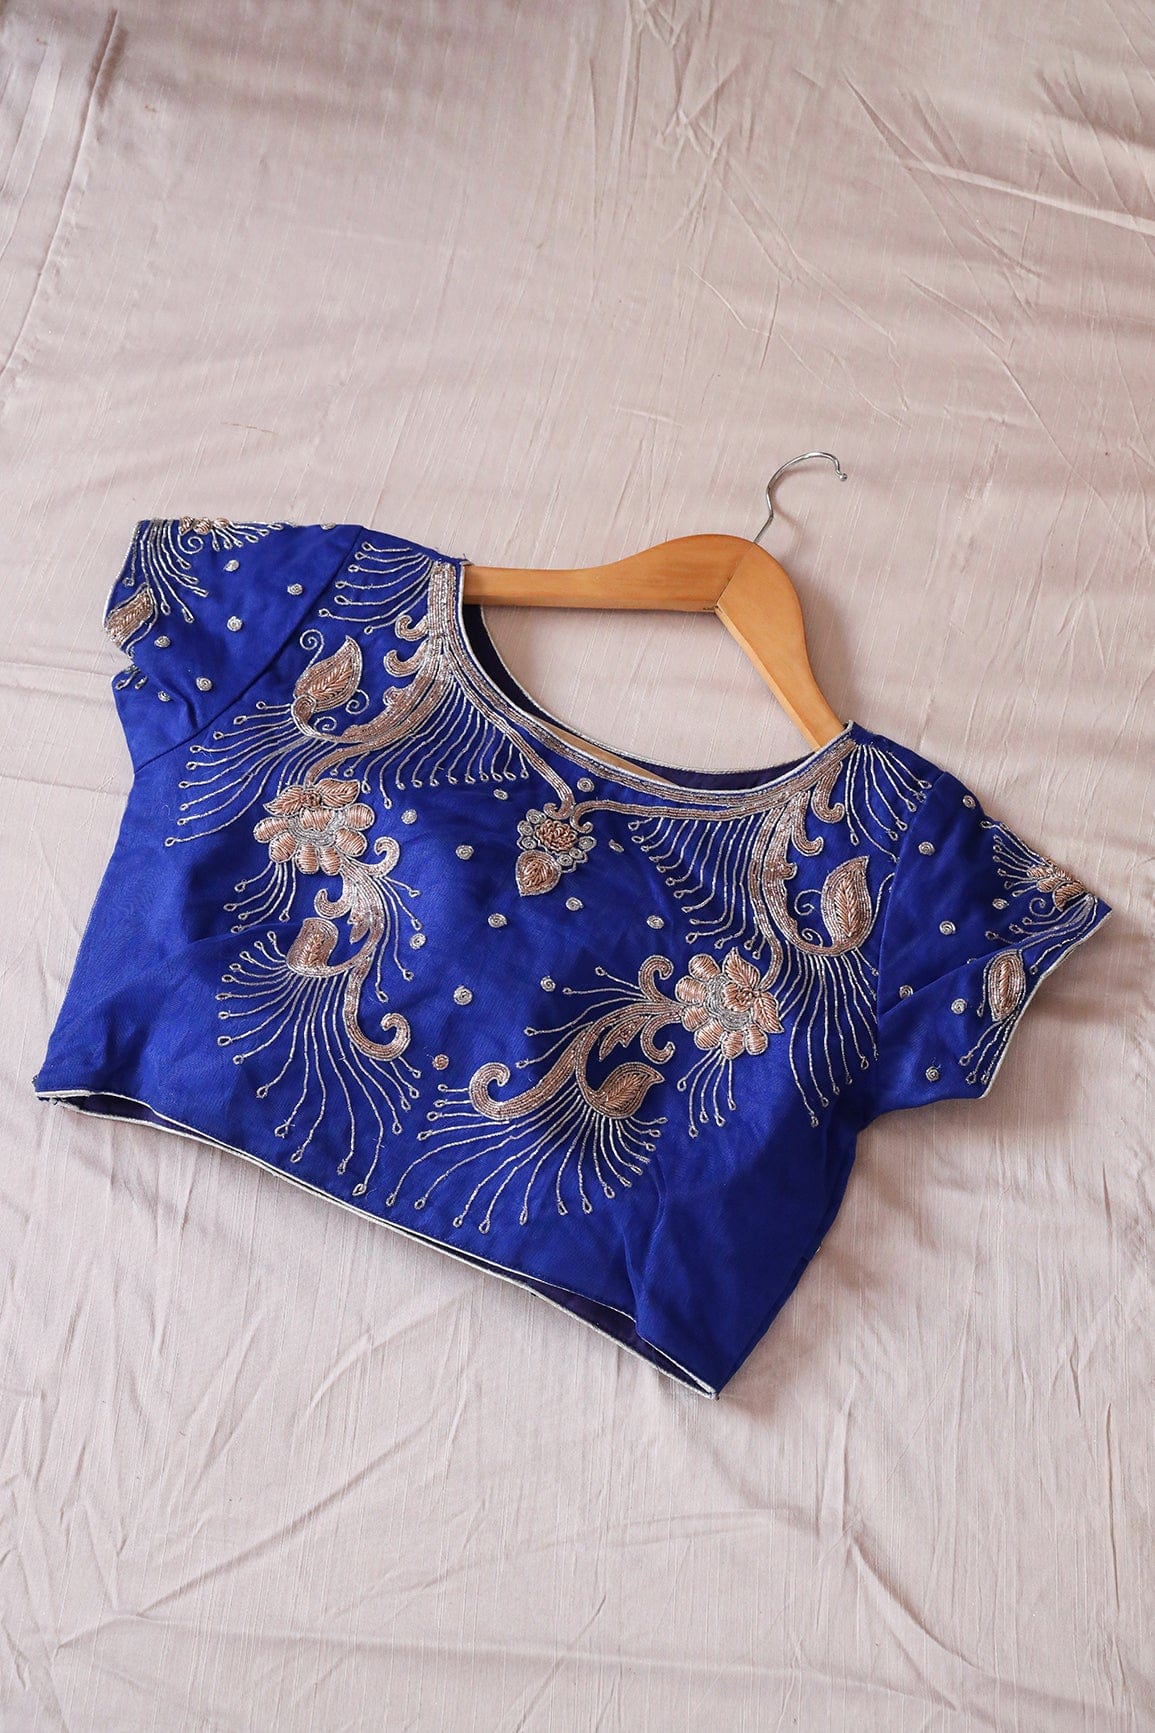 doeraa Blouse Royal Blue Hand Work Embroidery Net Stitched Blouse